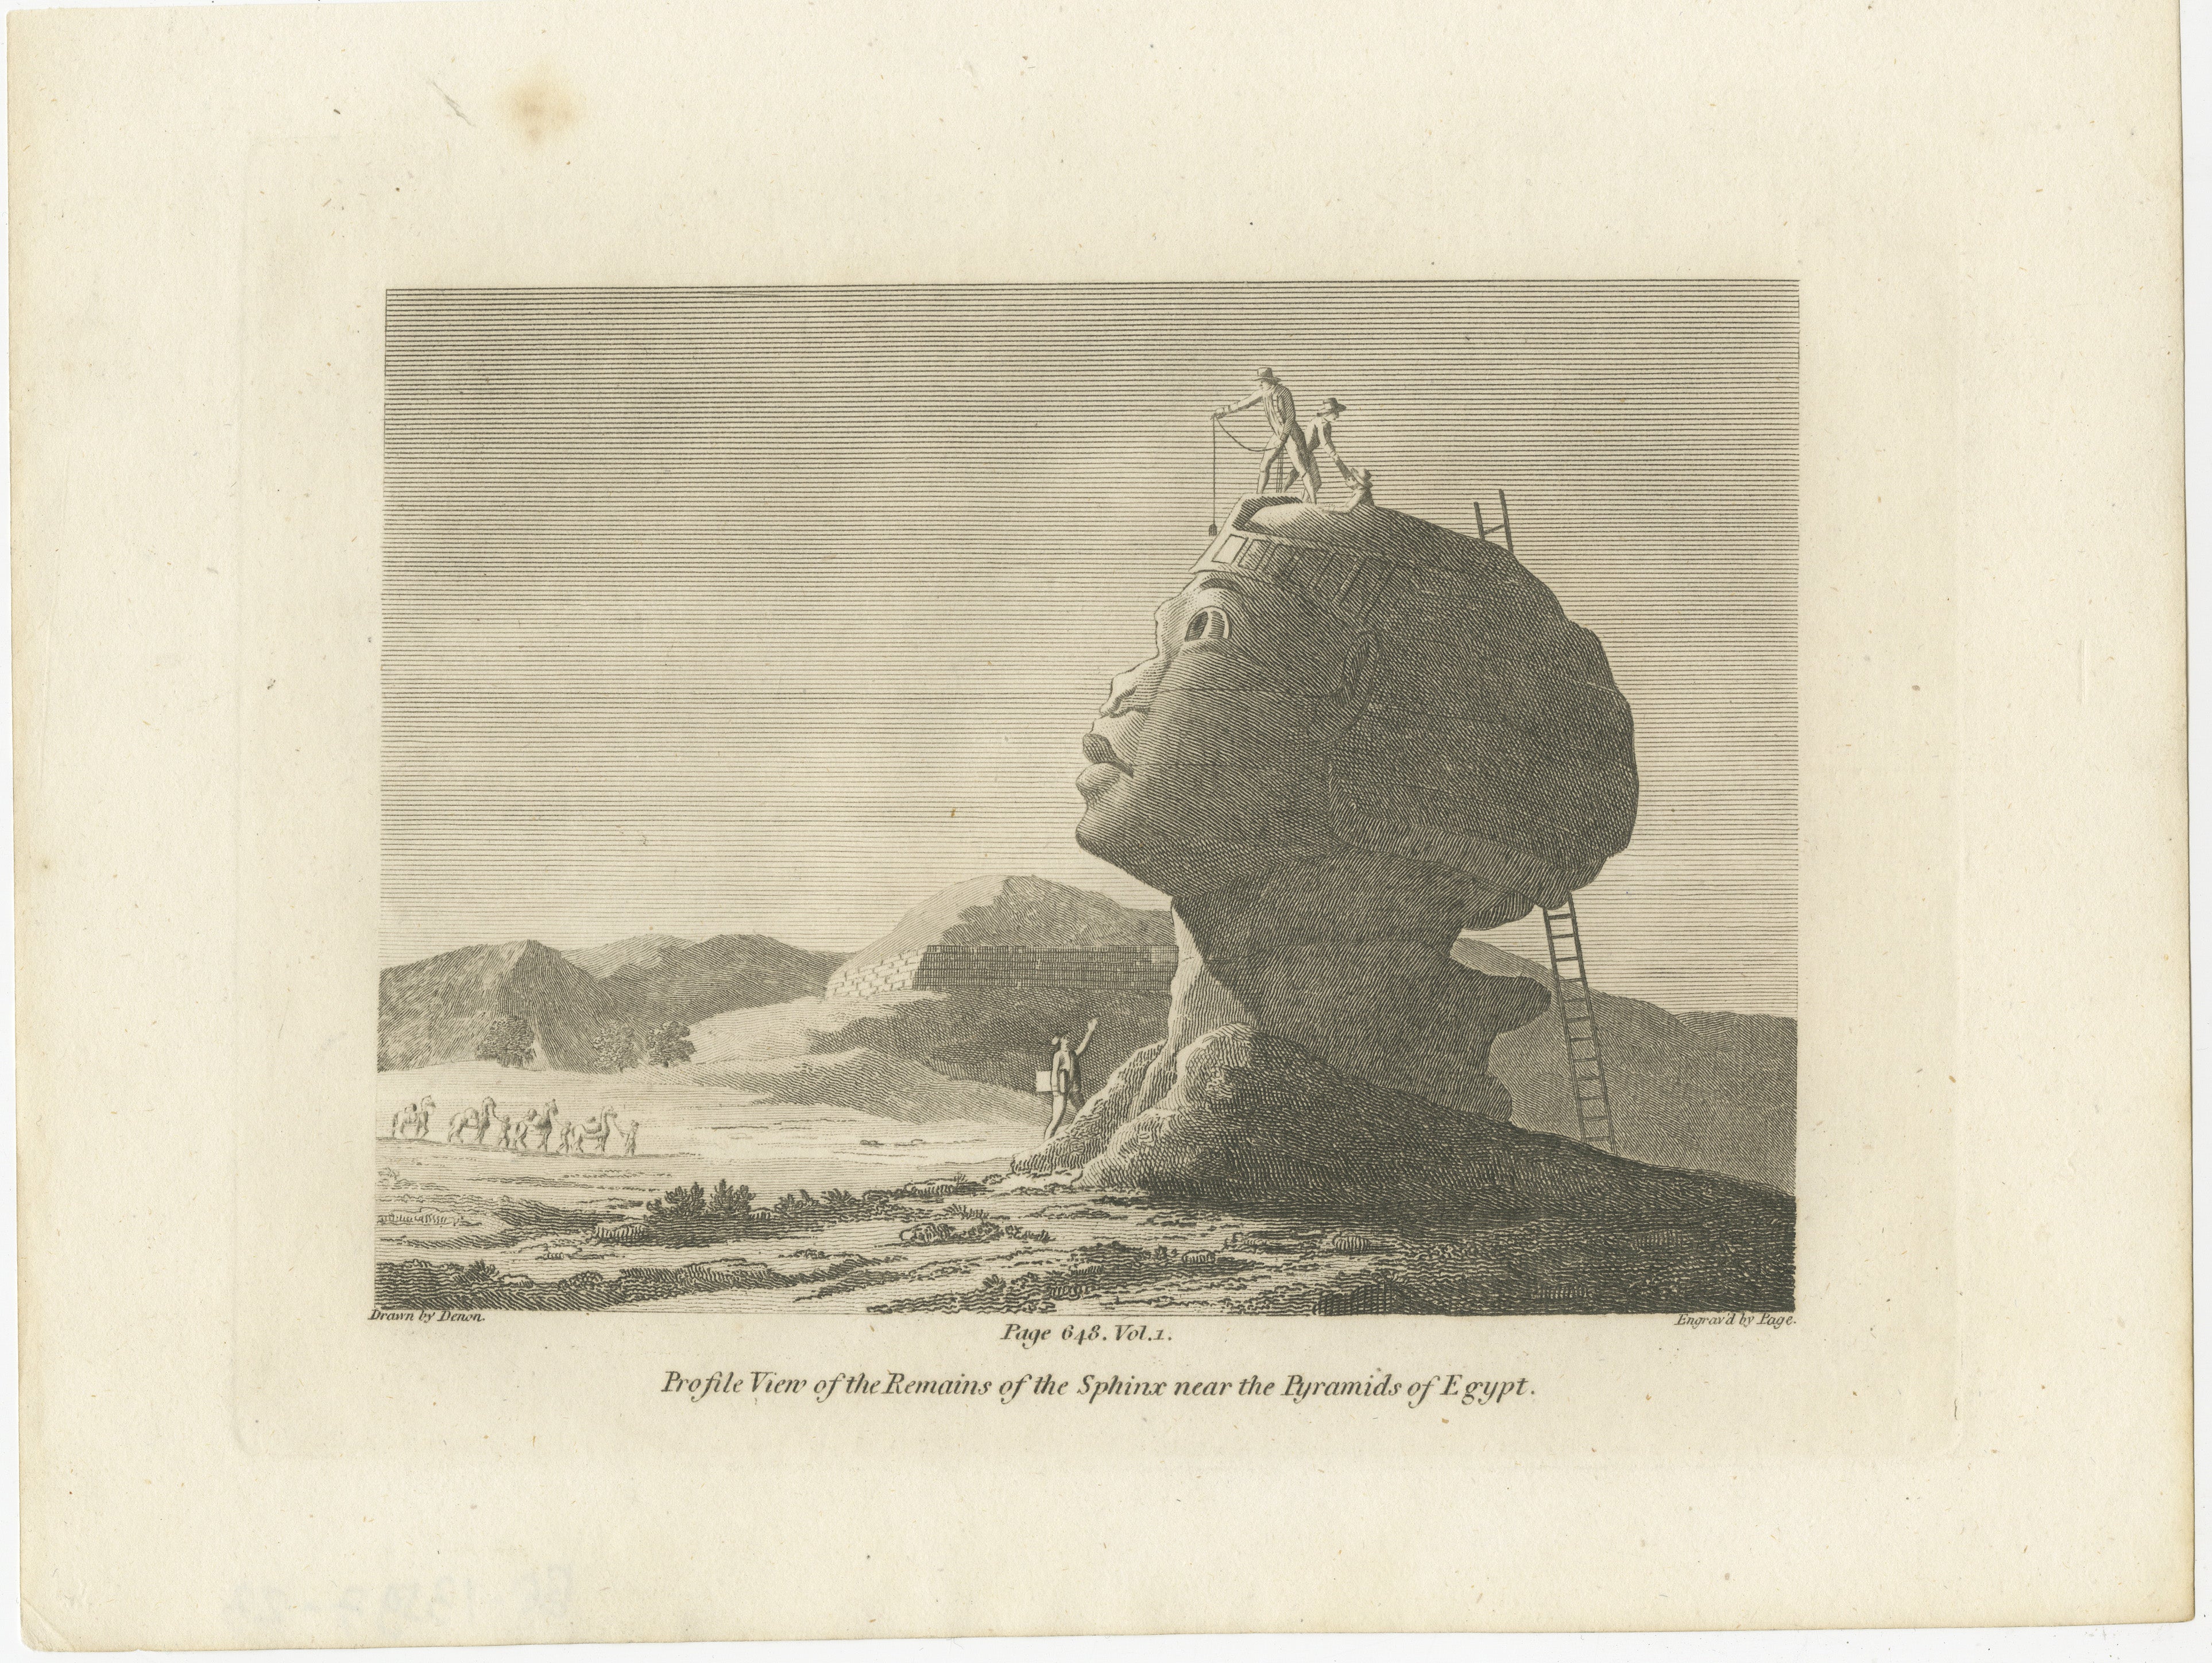 This engraving presents a profile view of the Sphinx, capturing its grandeur alongside the Pyramids of Giza in Egypt. It is a testament to the ancient civilization's architectural prowess and has intrigued explorers, historians, and travelers for